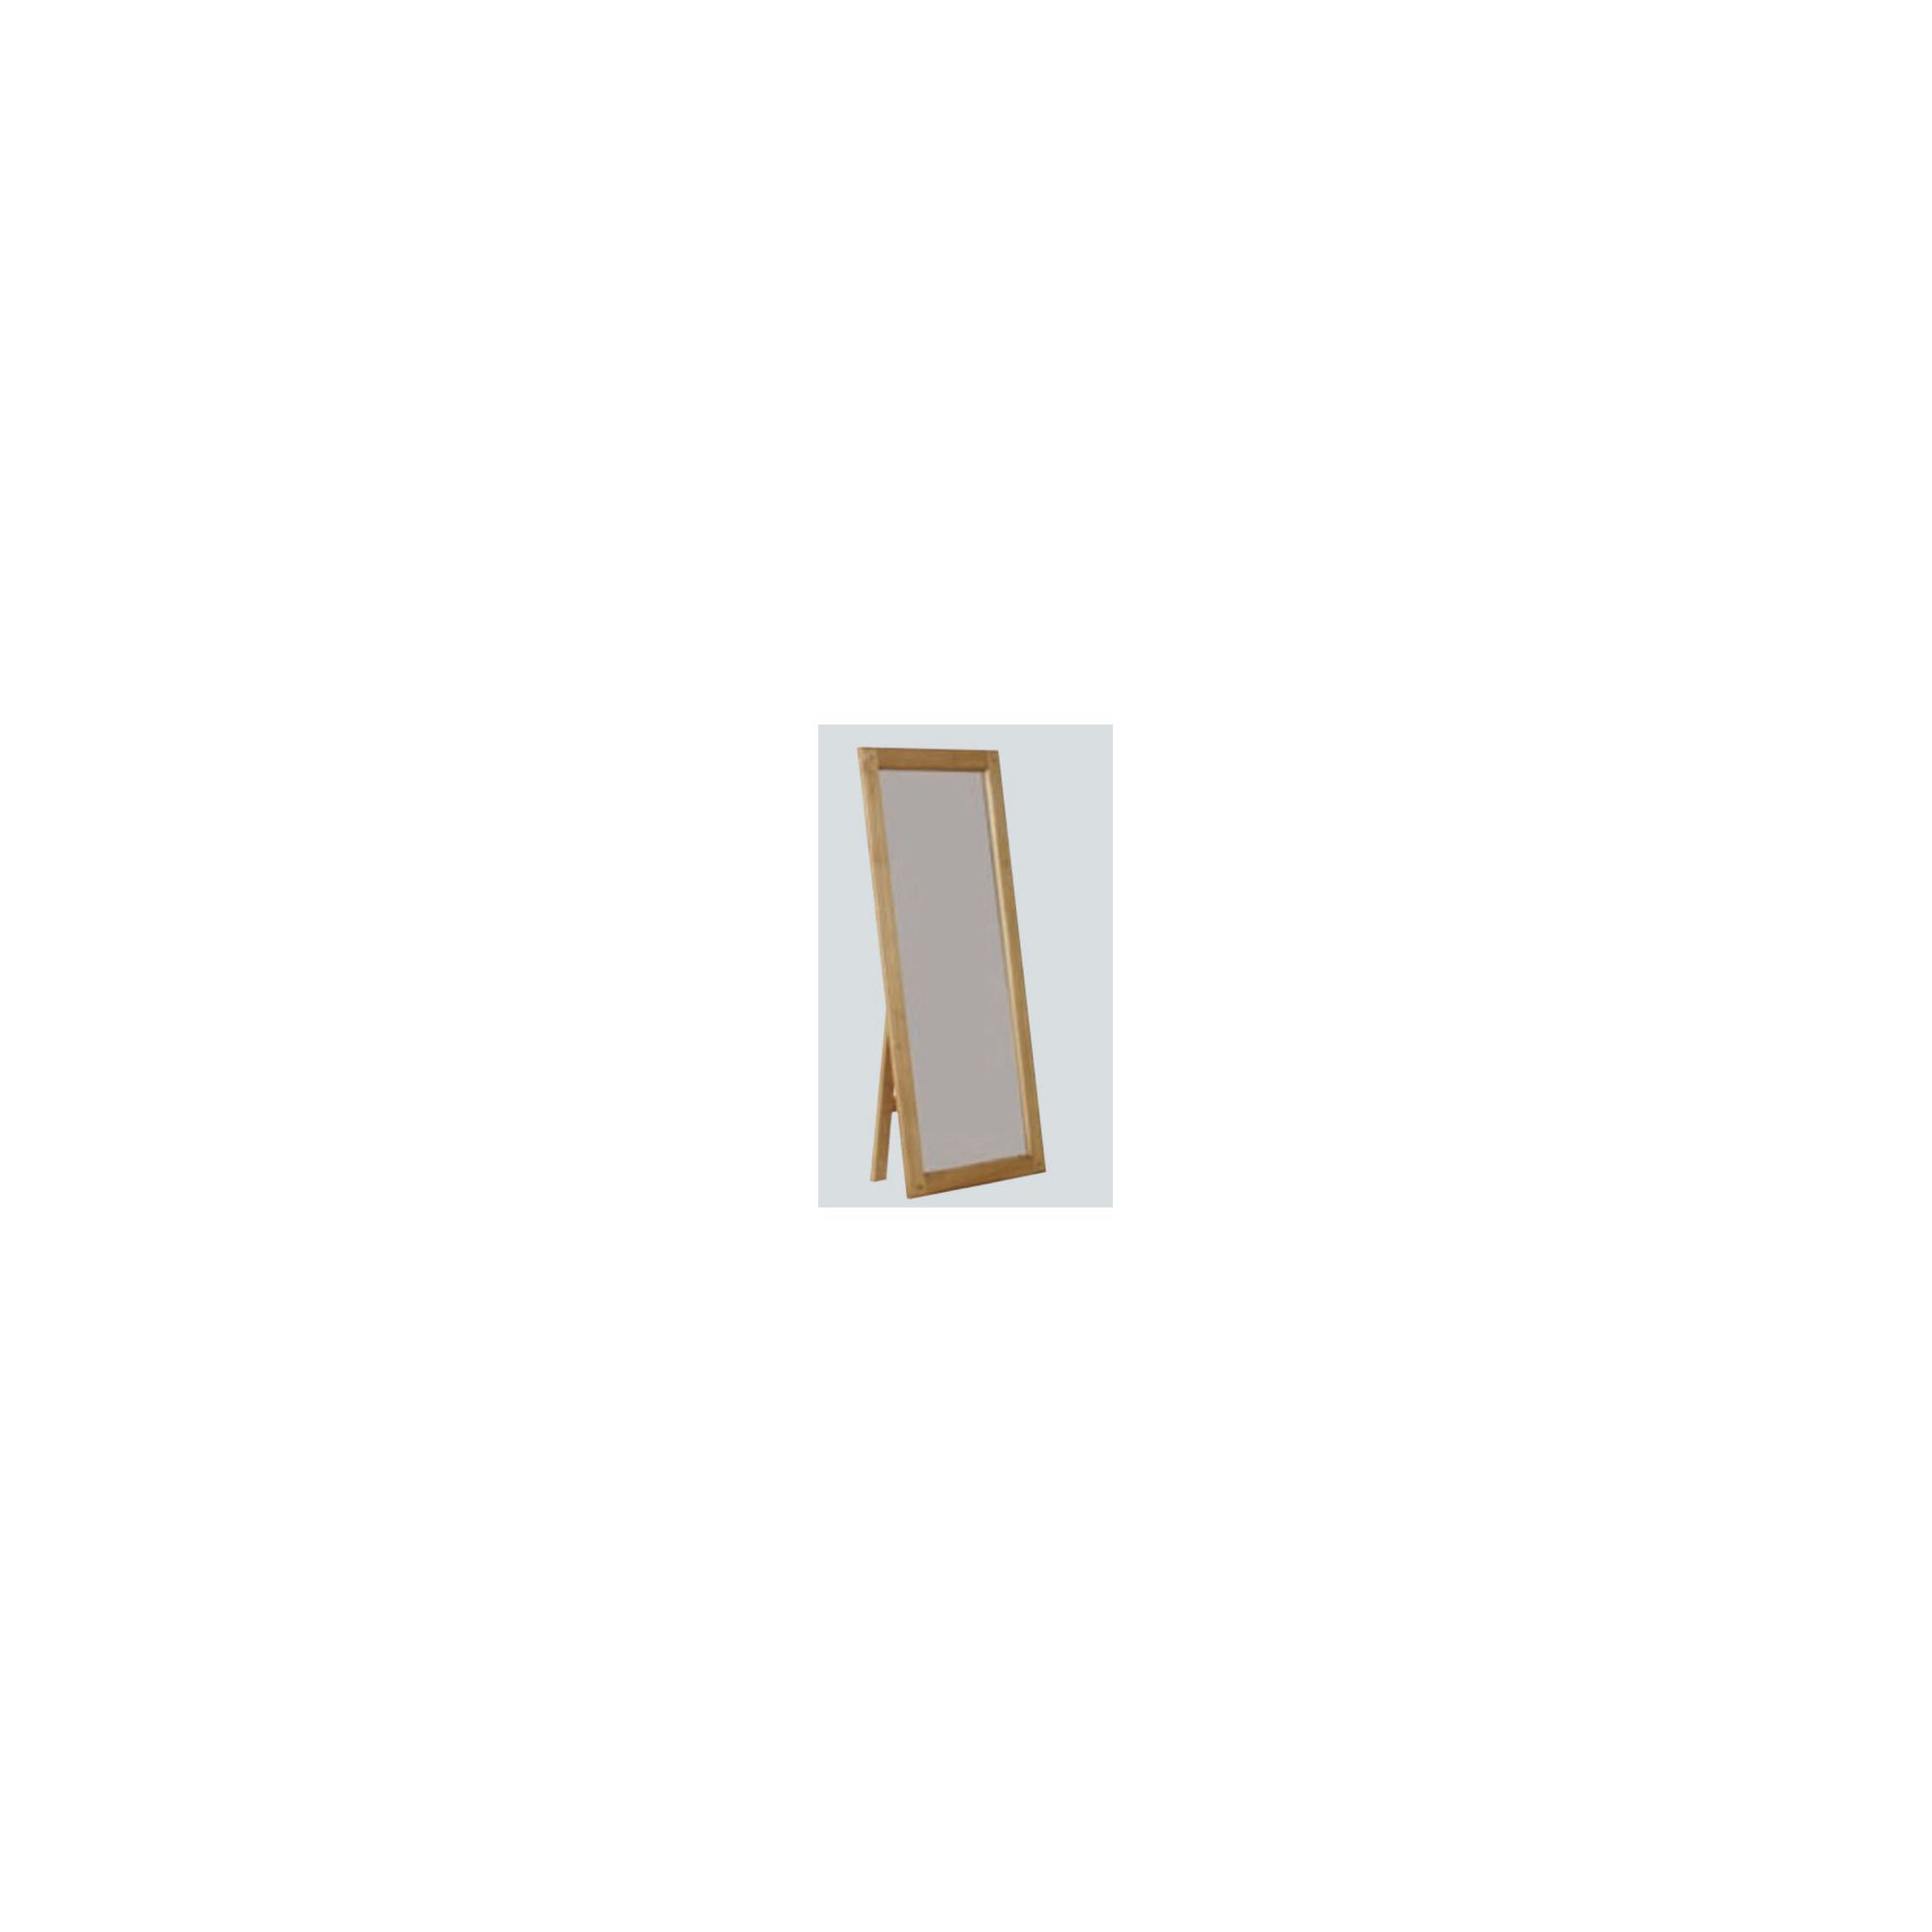 Sherry Designs Legacy Bedroom New Mirror with Stand - Antique Dark at Tesco Direct